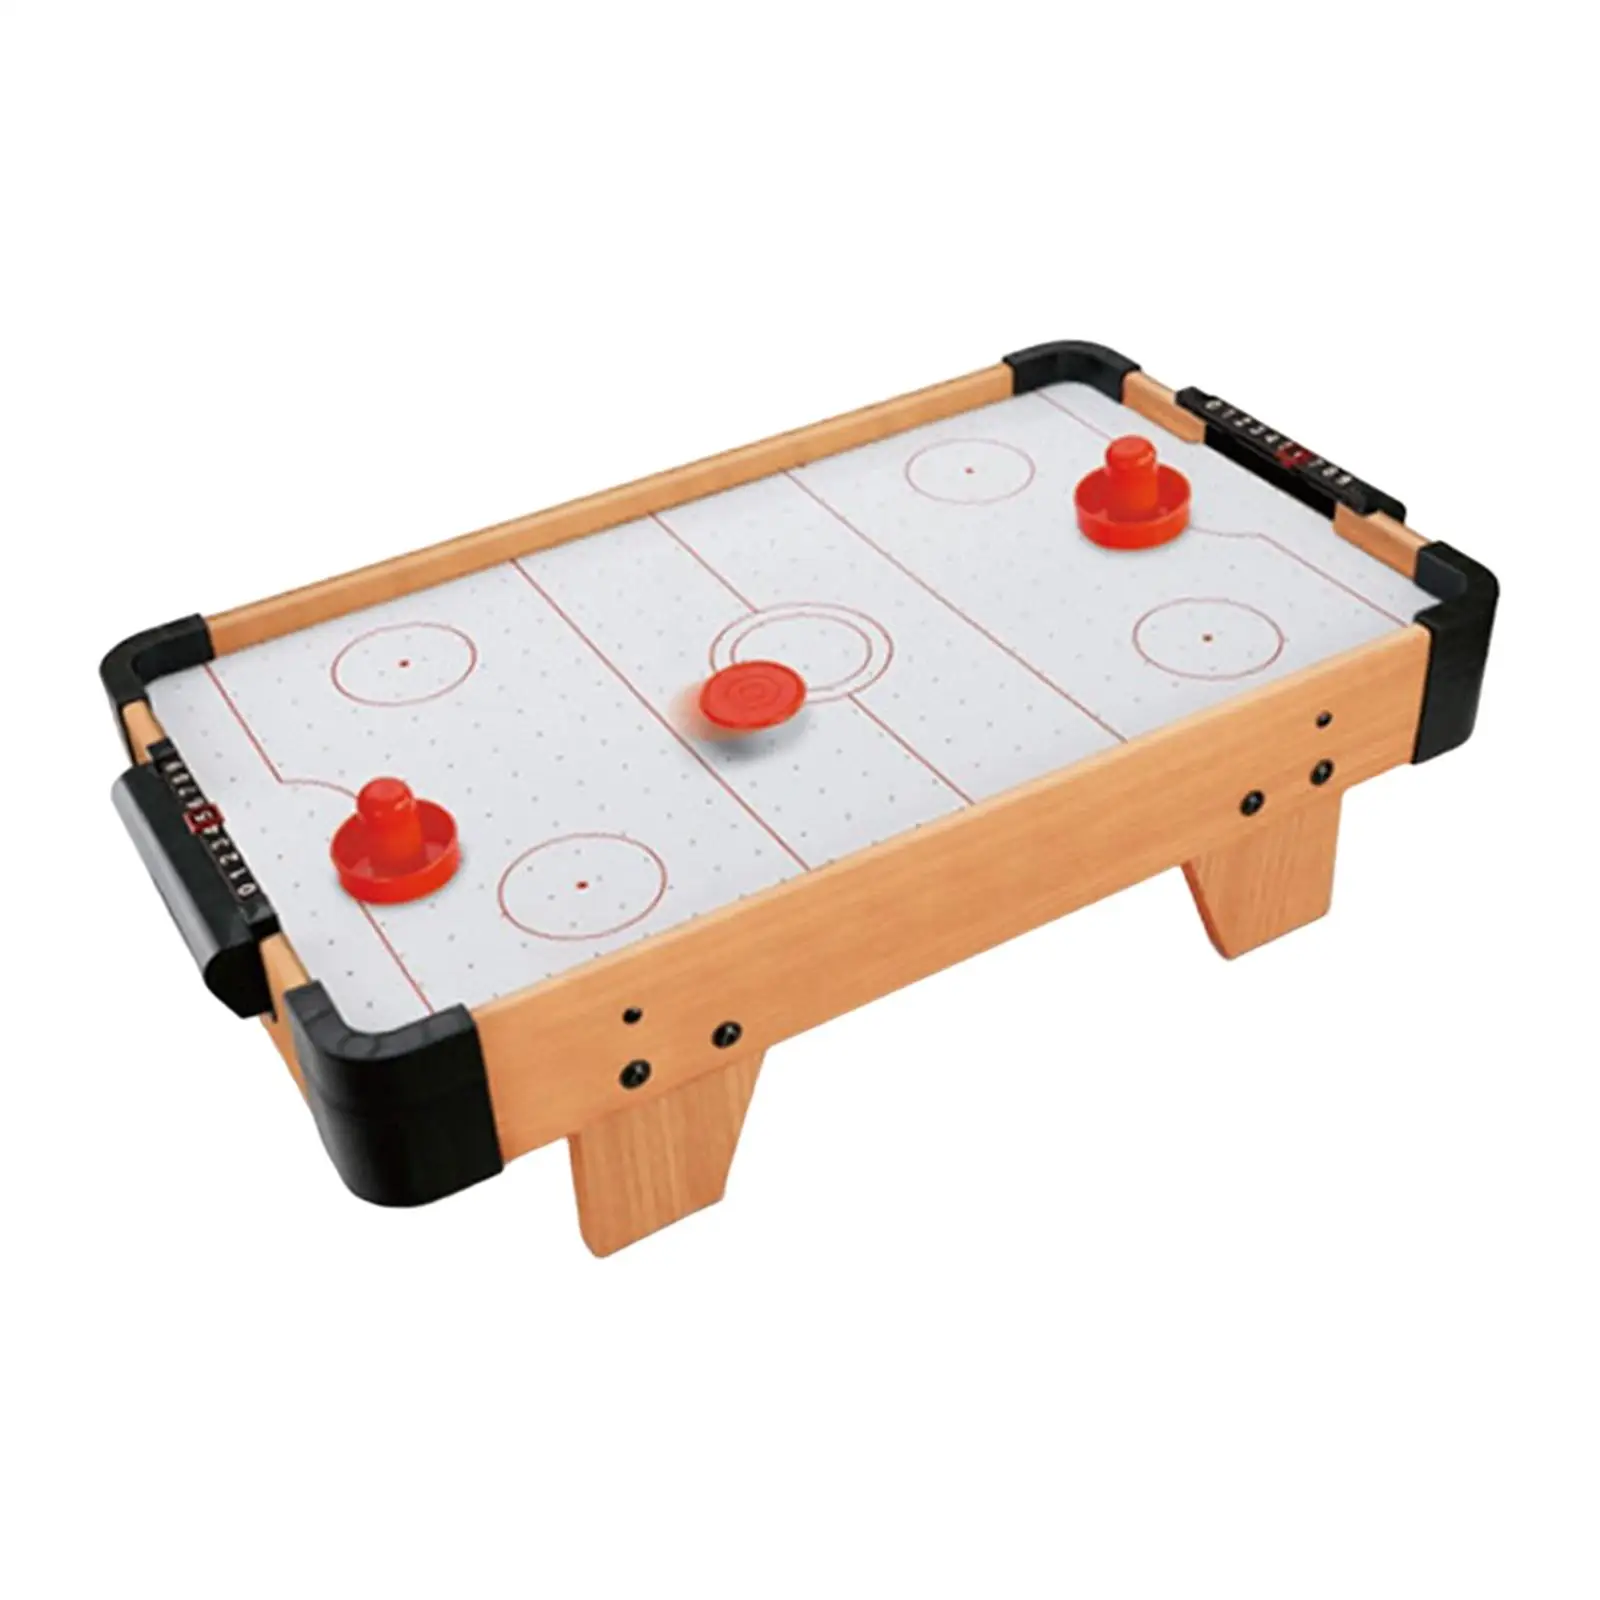 Air Hockey Board Game with Sliders and Pucks,Parent Child Interactive Family Game for Girls Boys